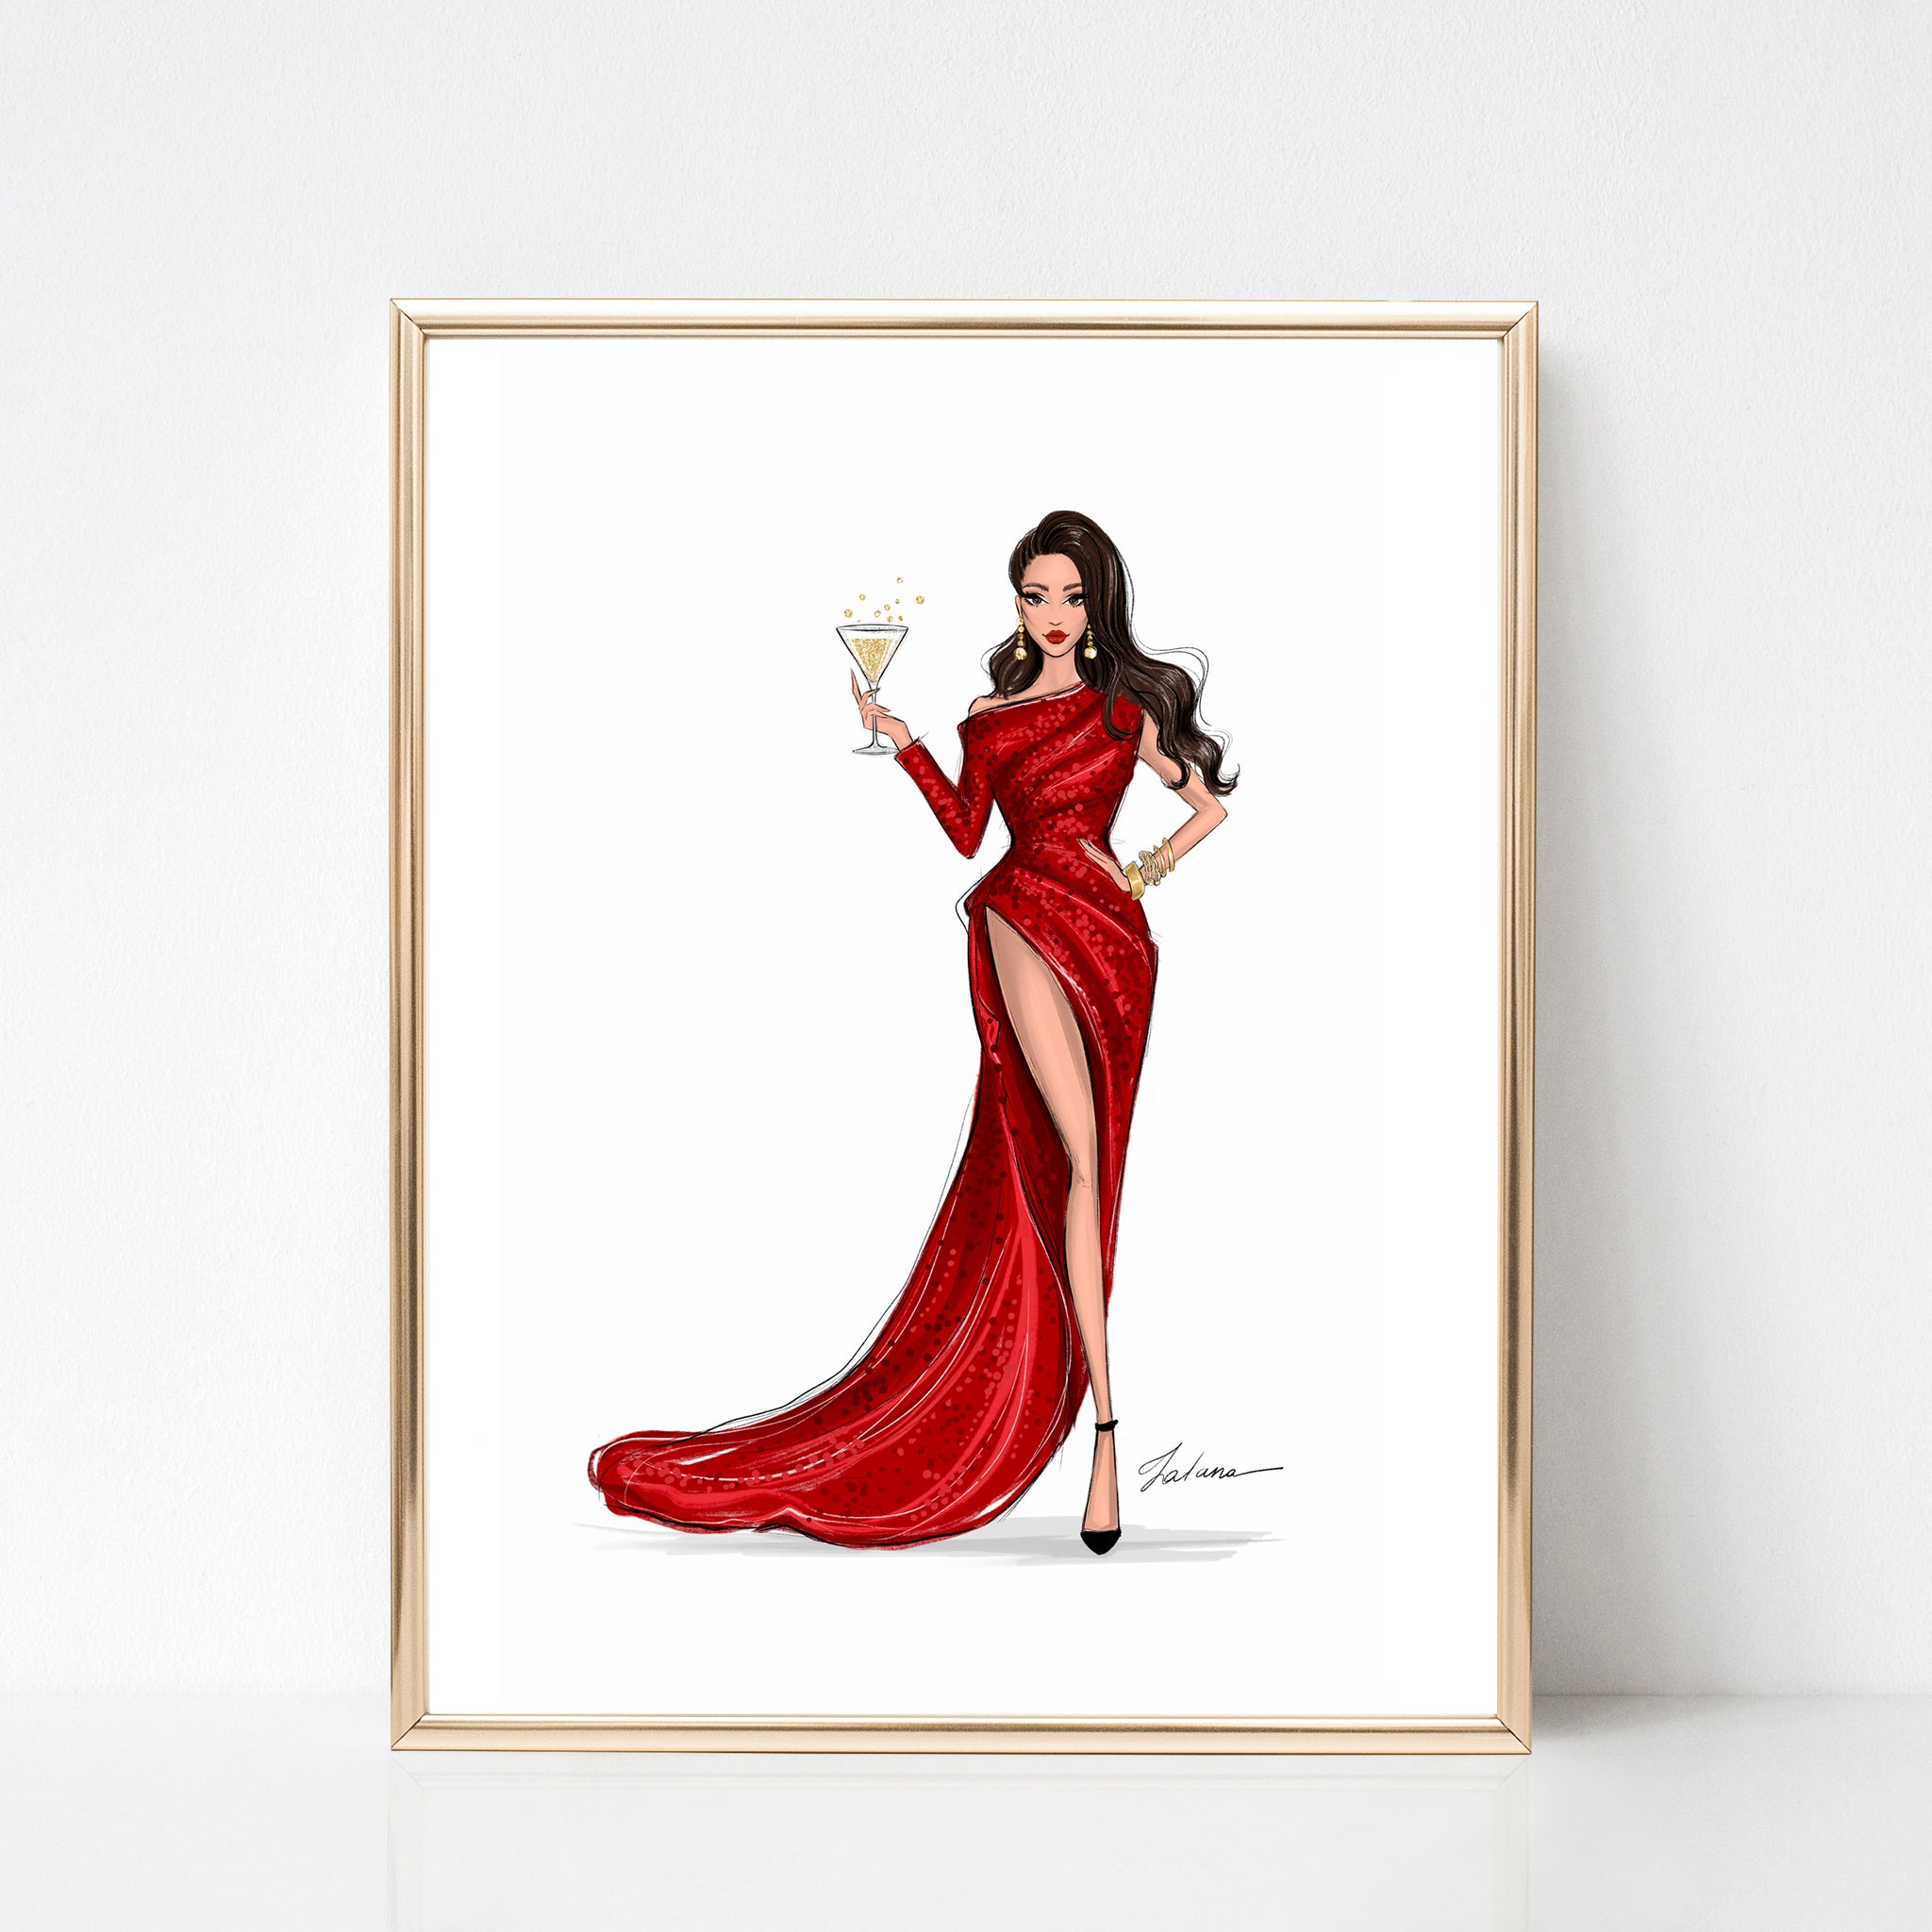 Woman in a Red Dress Illustration Graphic by Artsypal · Creative Fabrica